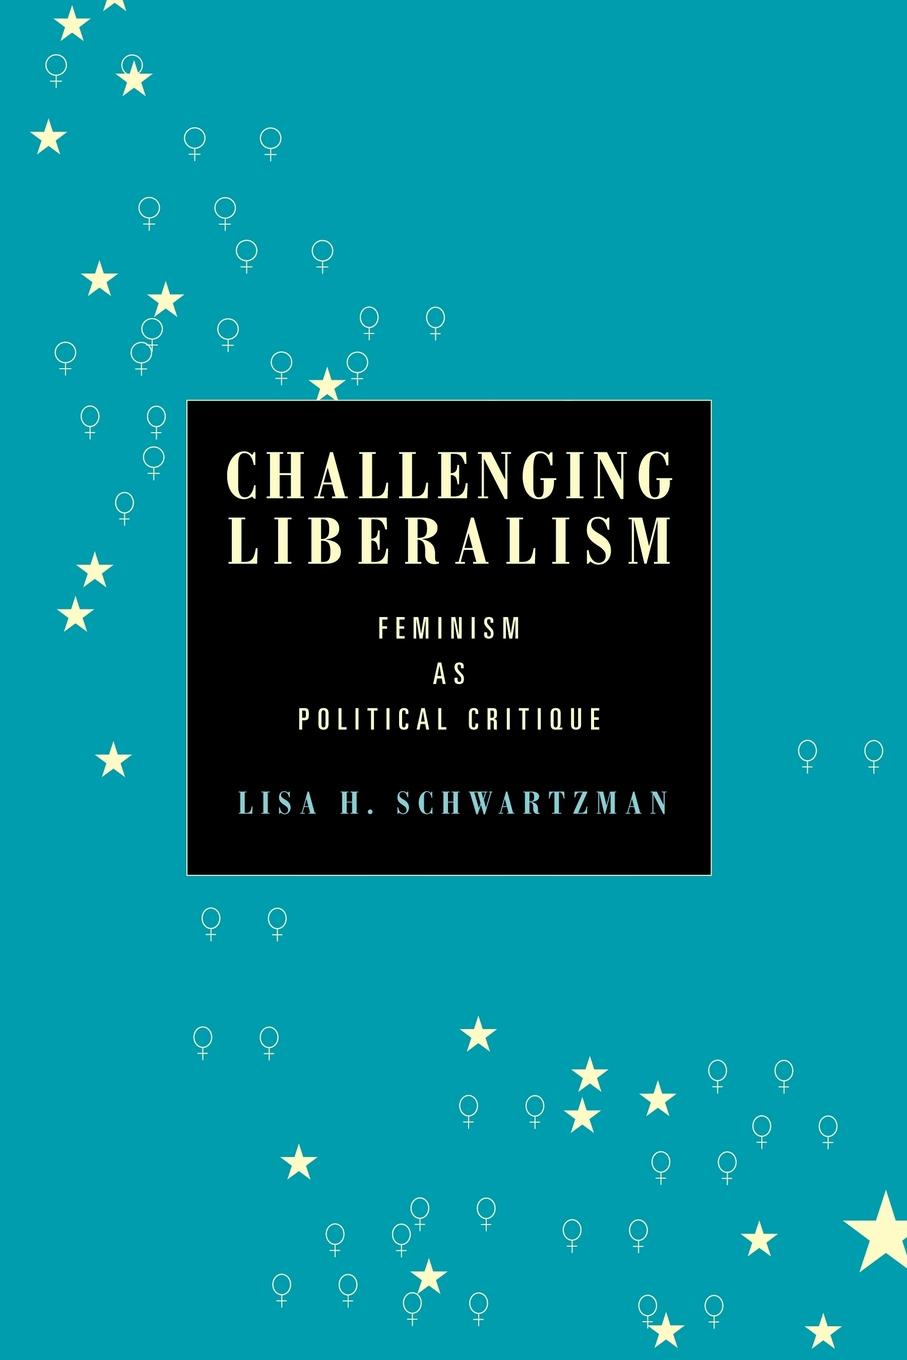 Challenging Liberalism. Feminism as Political Critique